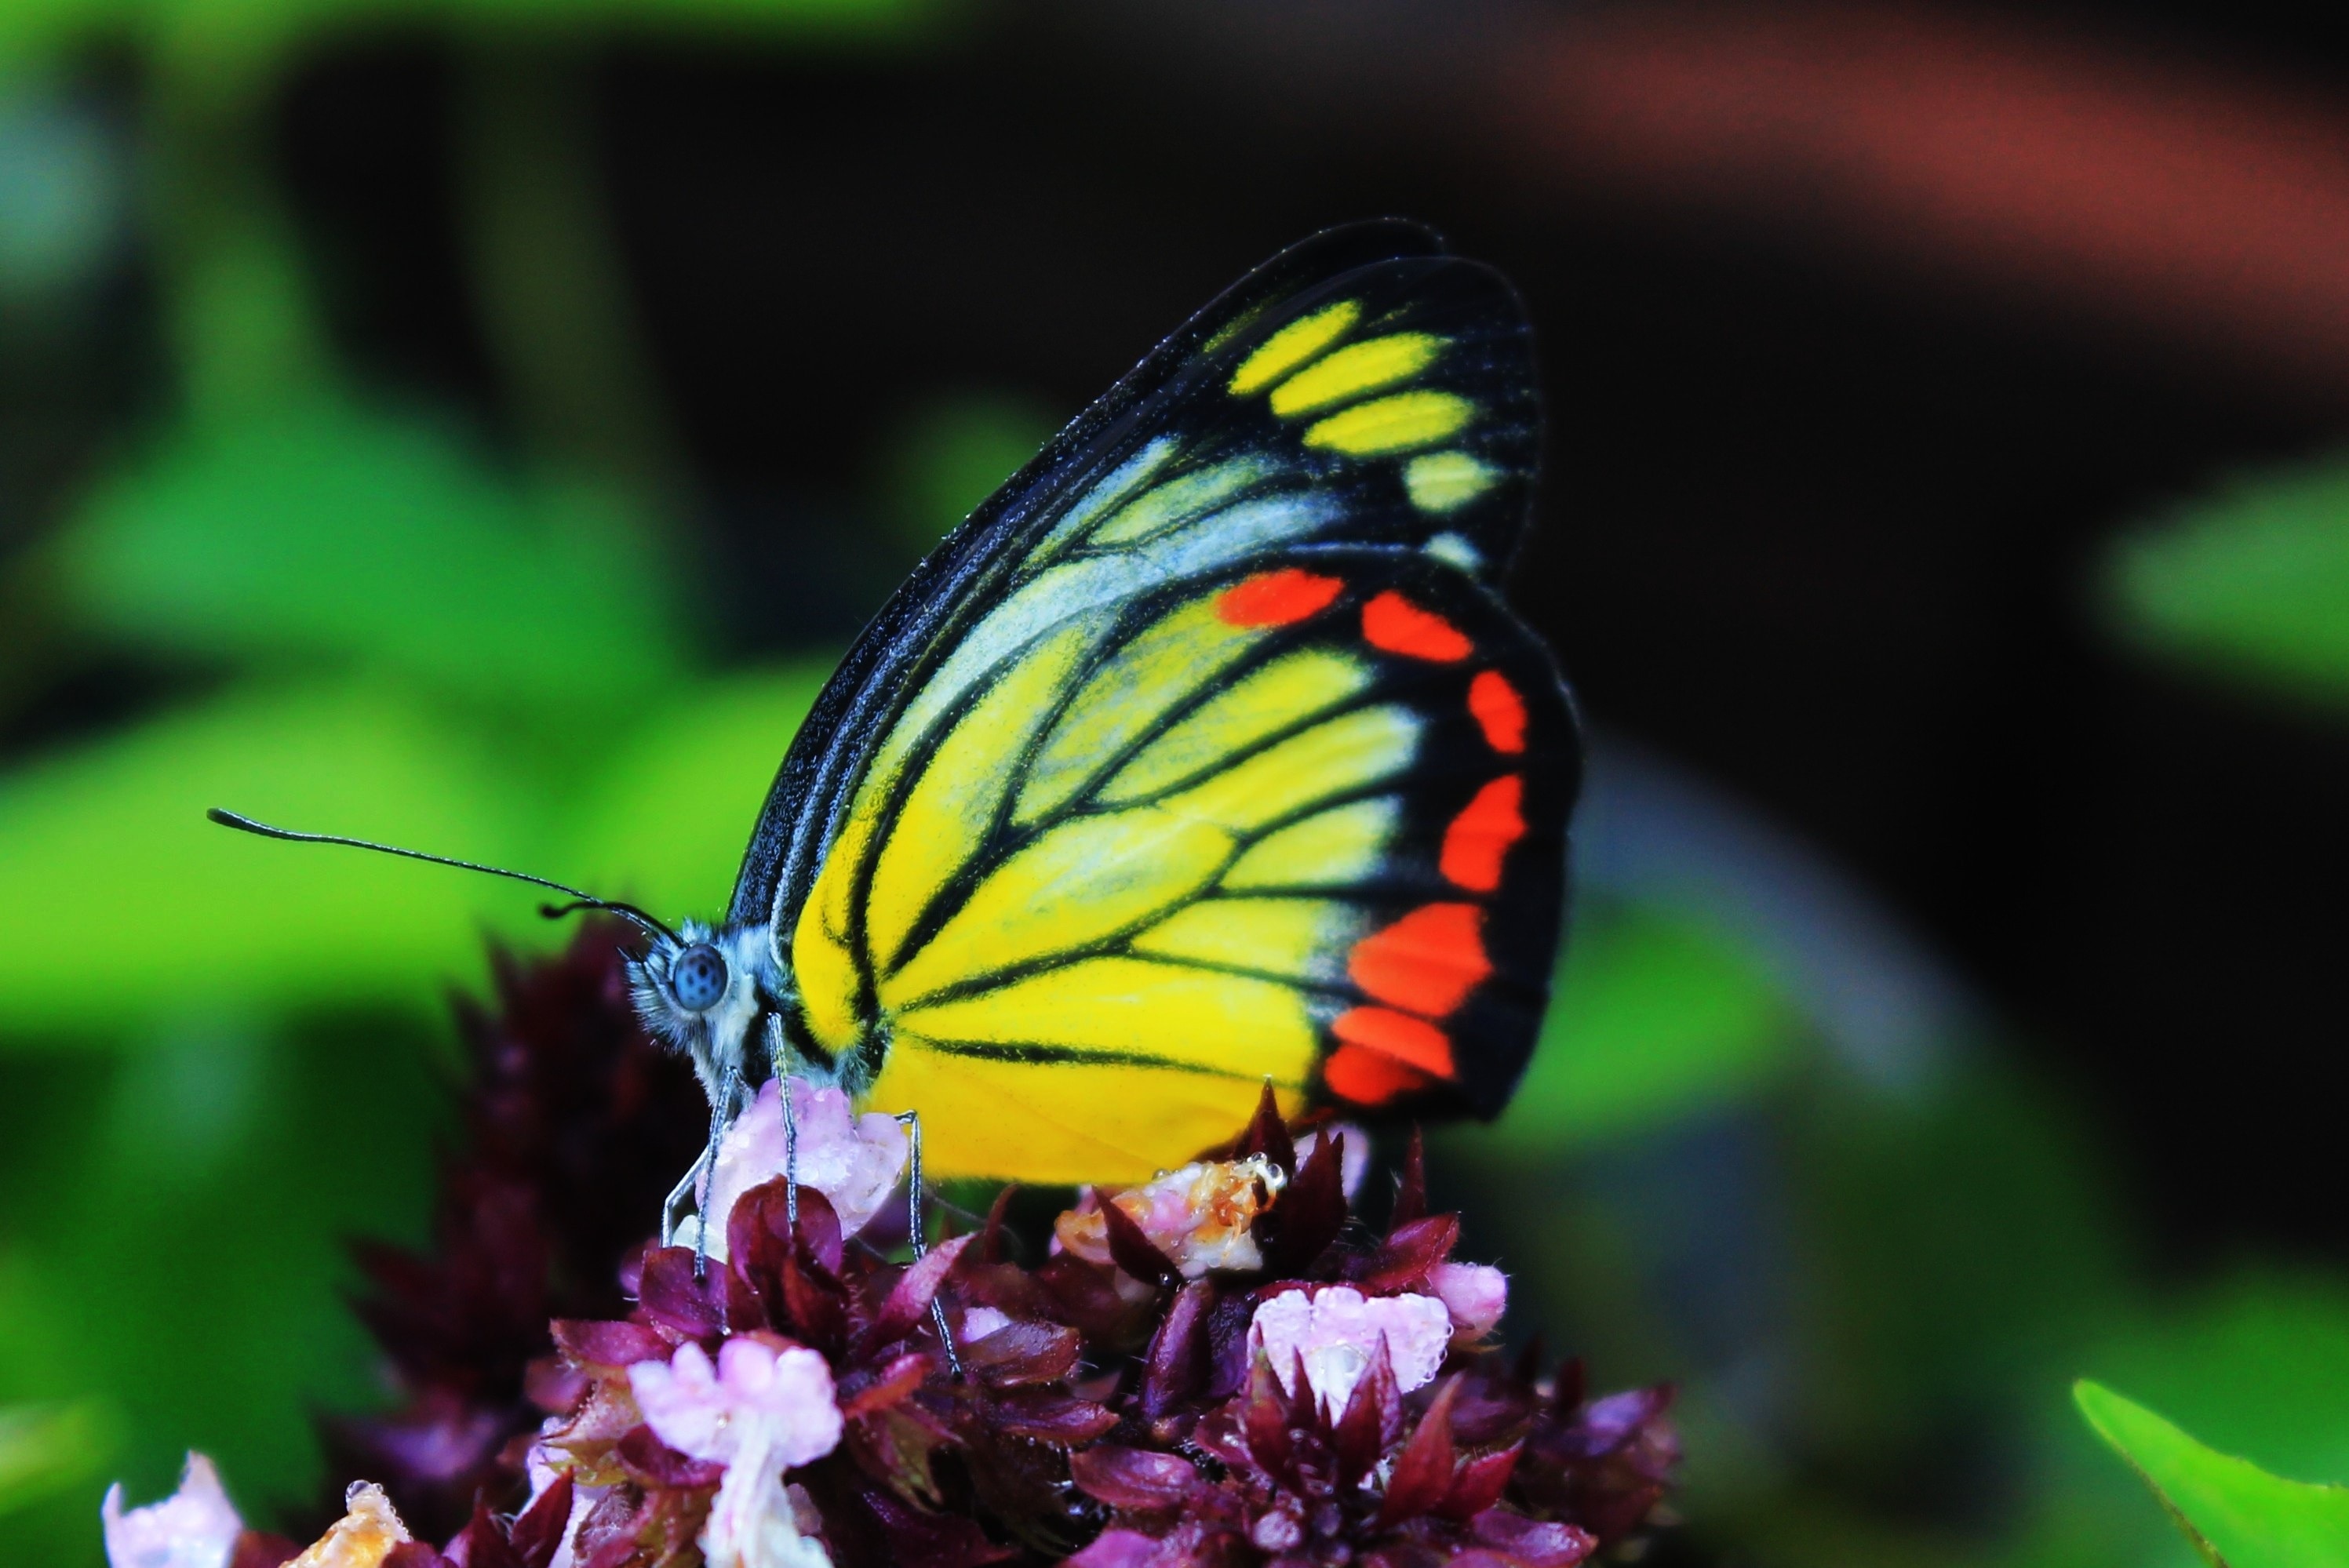 yellow black and red butterfly free image | Peakpx